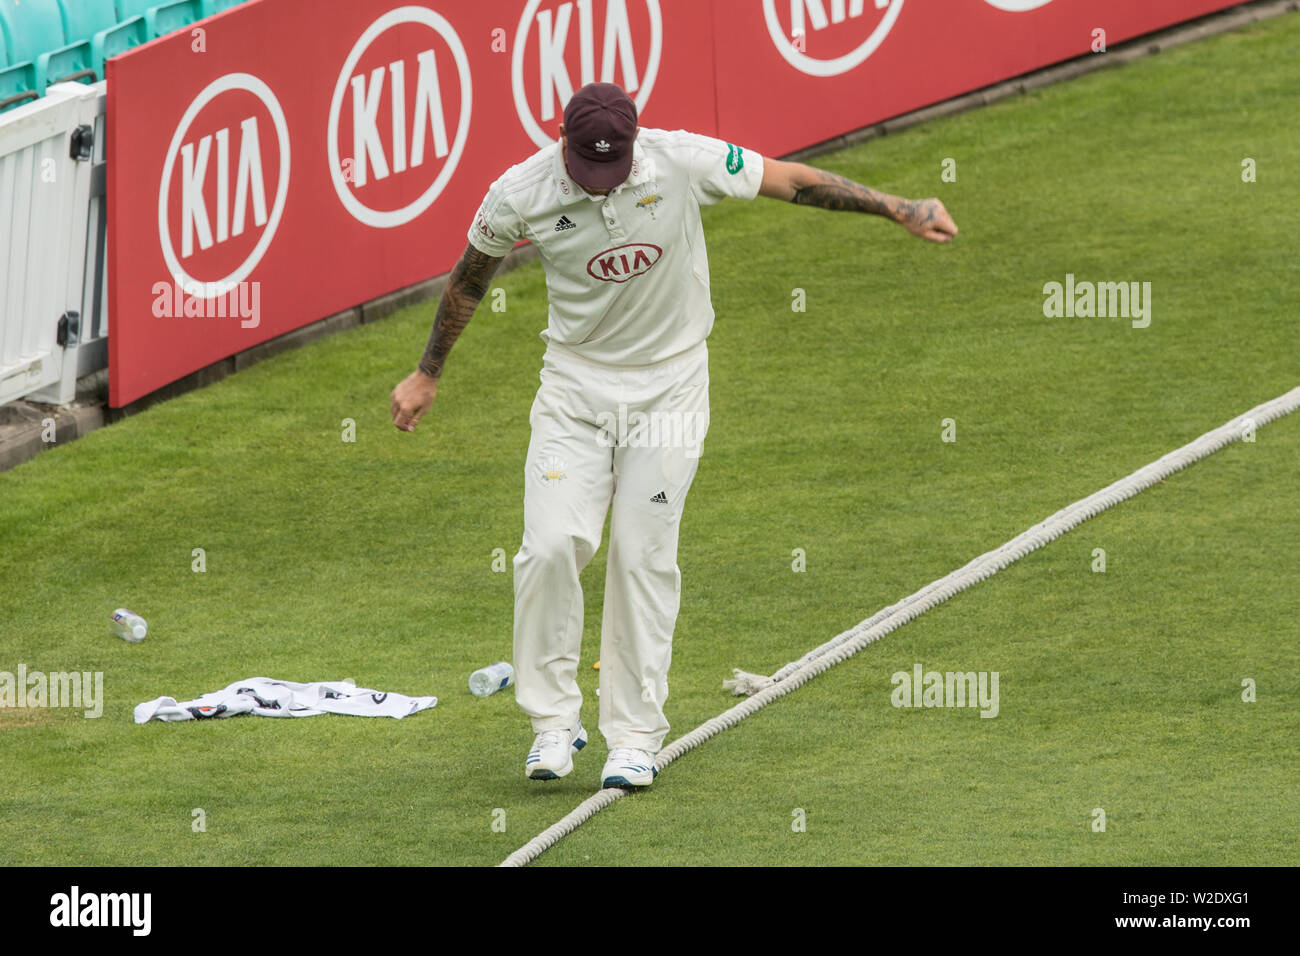 London, UK. 8th July, 2019. Jordan Clark, balancing on a rope for Surrey against Kent on day two of the Specsavers County Championship game at the Oval. Credit: David Rowe/Alamy Live News Stock Photo